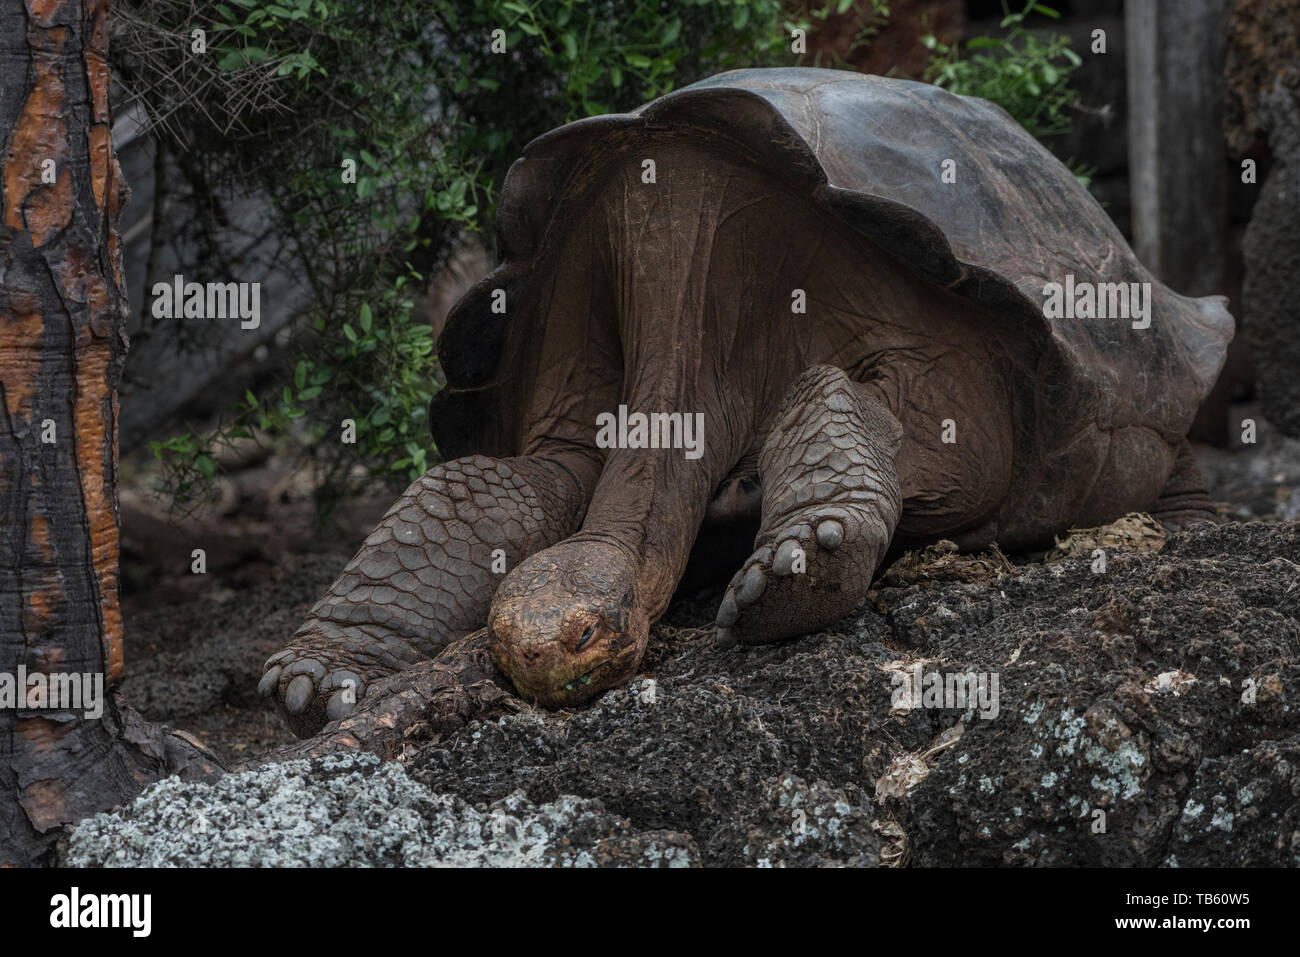 Galapagos giant tortoise (Chelonoidis nigra) part of the captive breeding program at the CHarles Darwin research center in the Galapagos islands. Stock Photo